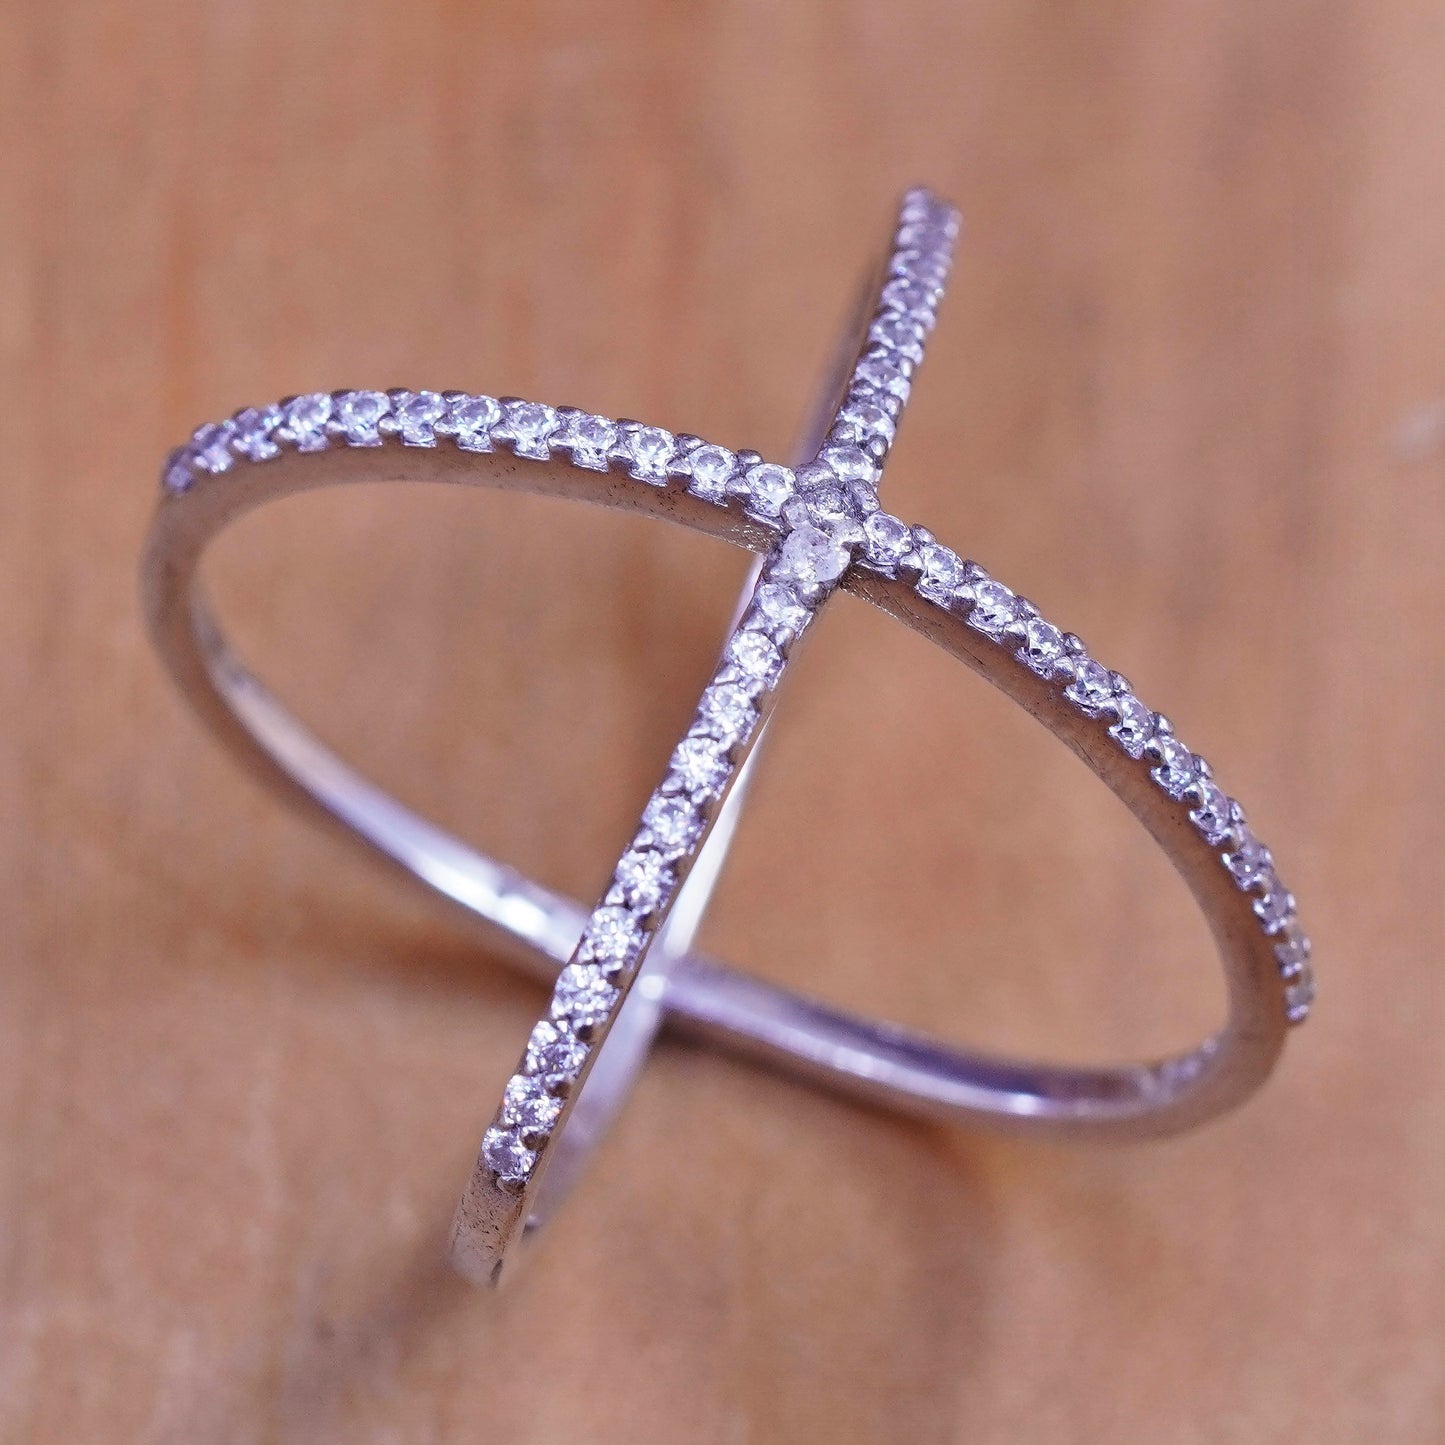 Size 7.5, vintage Sterling silver handmade ring, 925 cross band with cz